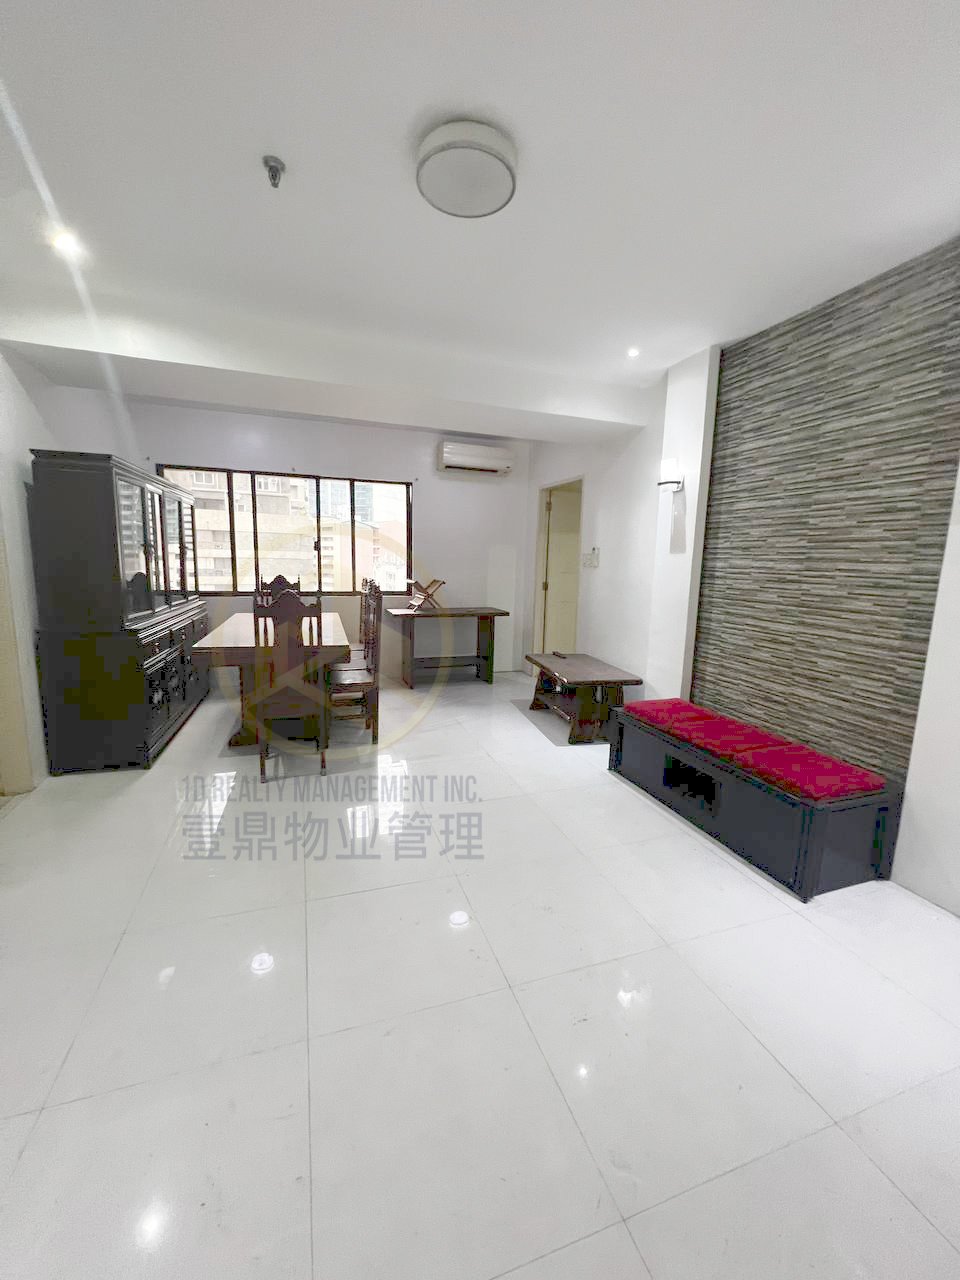 FOR LEASE 2BR - LPL MANOR - Leviste St. Makati City